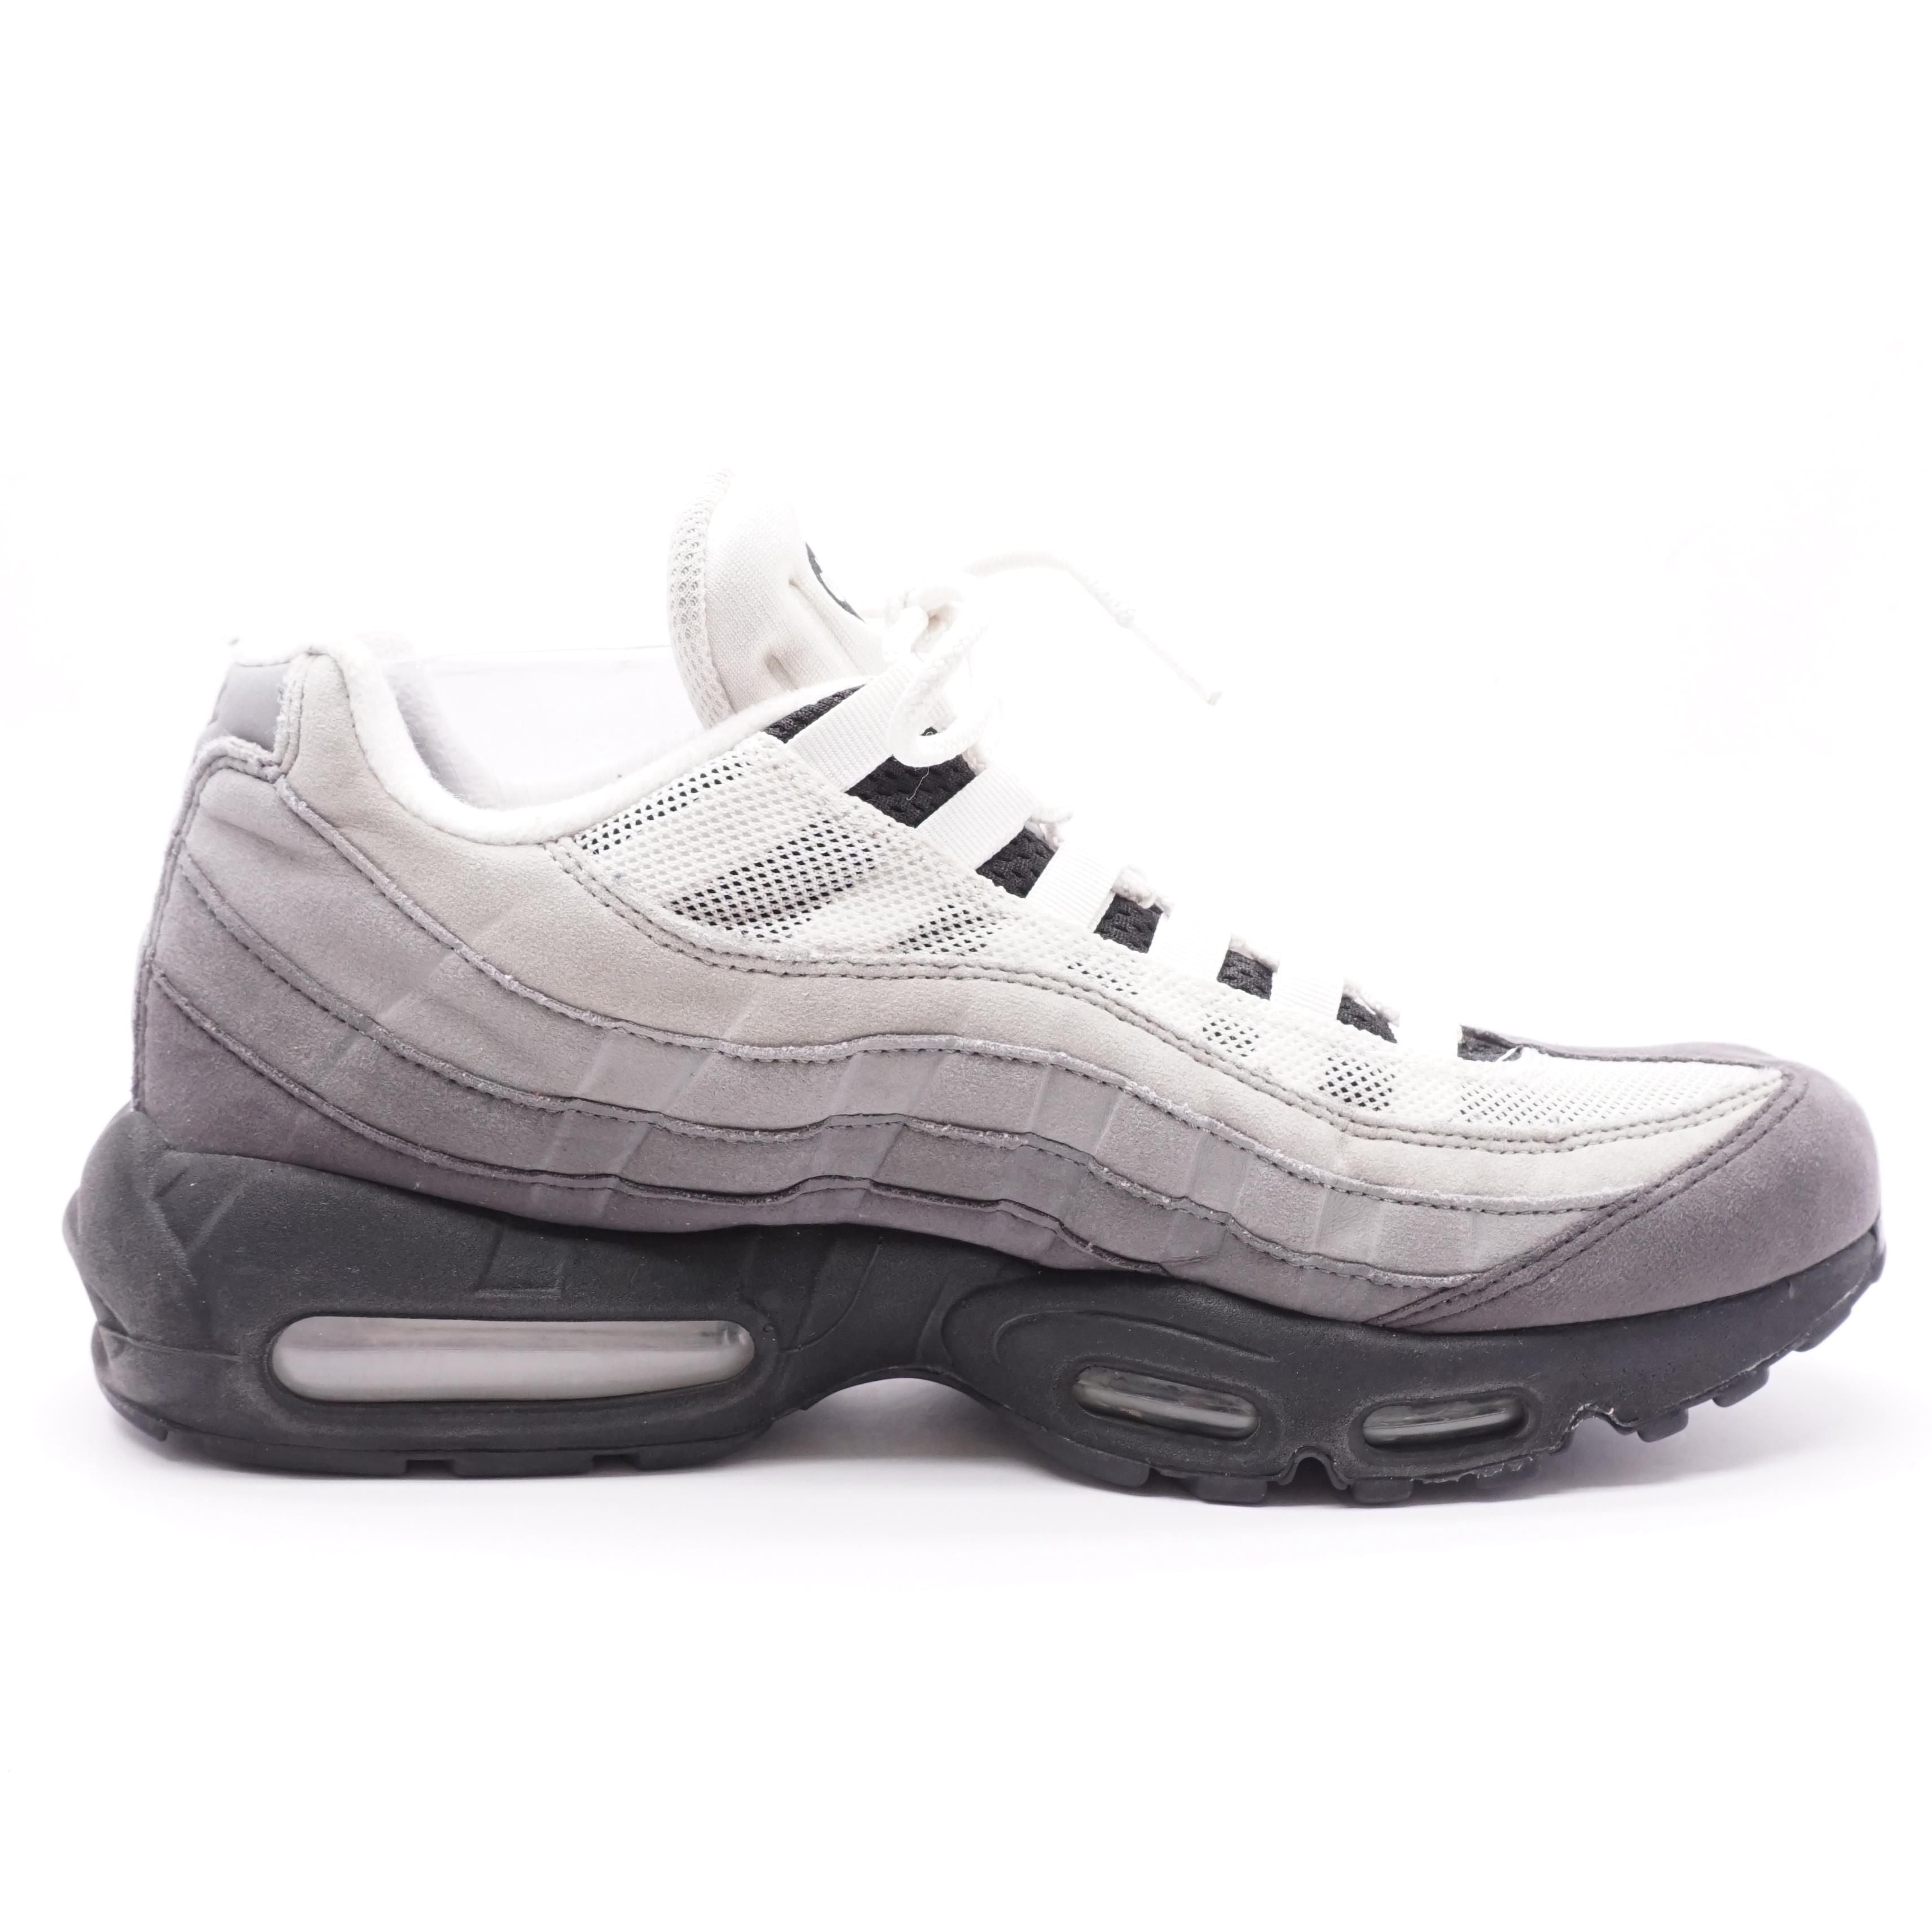 Air Max 95 OG Sneakers in Black Anthracite – Unclaimed Baggage